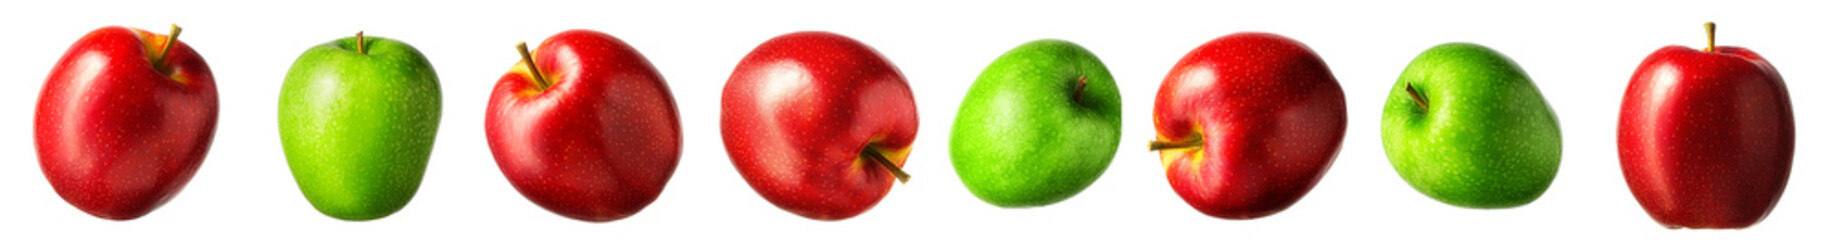 Wall Mural - Group of red and green apples on white background